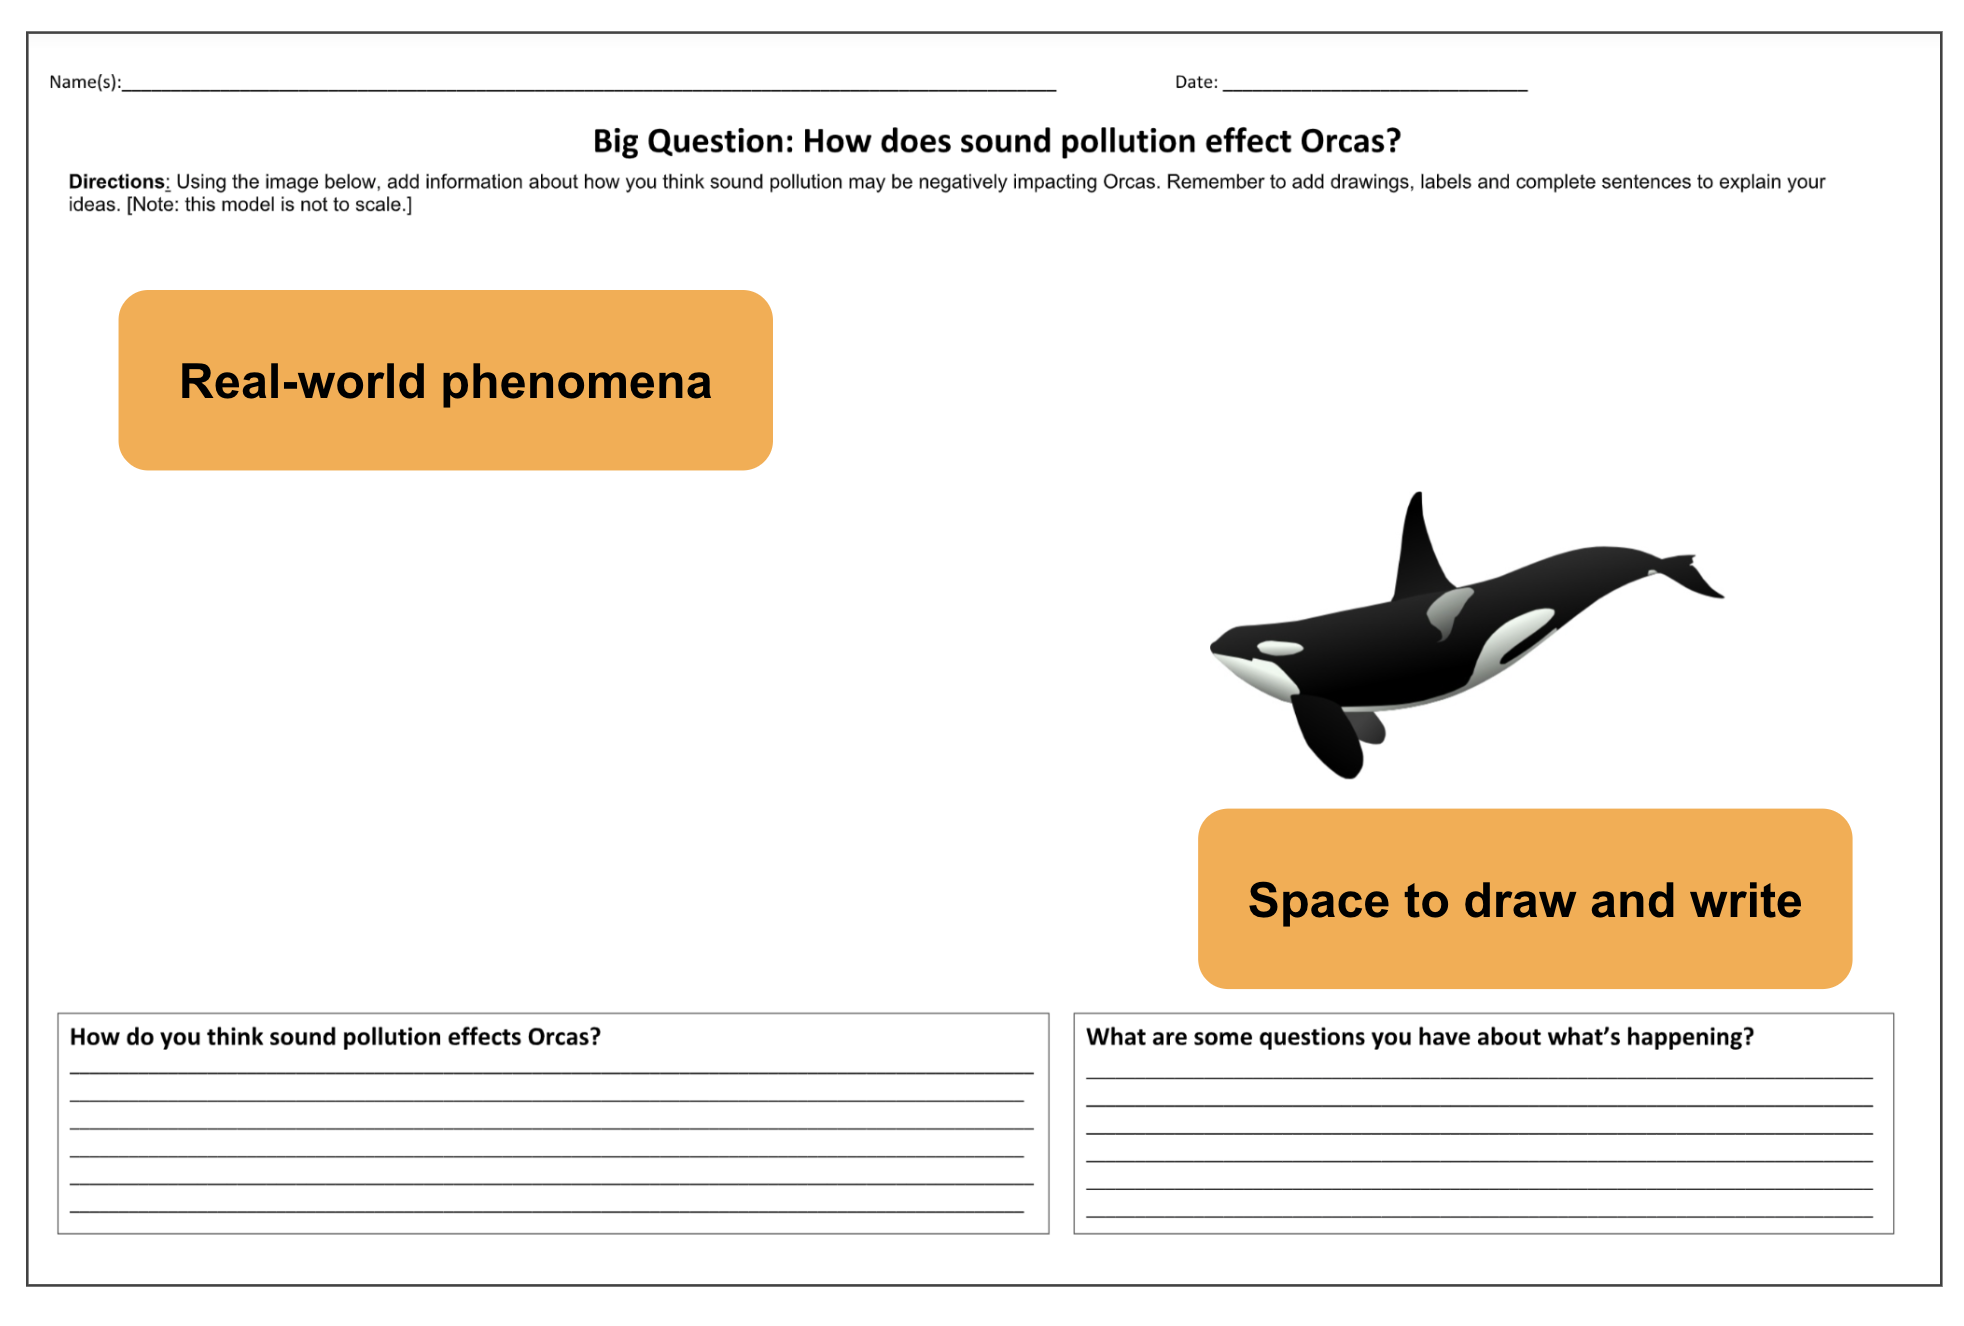 An initial model asking the student to draw and label what they think about how sound pollution may negatively be impacting Orcas with space at the bottom of the model for the student to write about what they think as well as for them to write questions they have about what's happening.